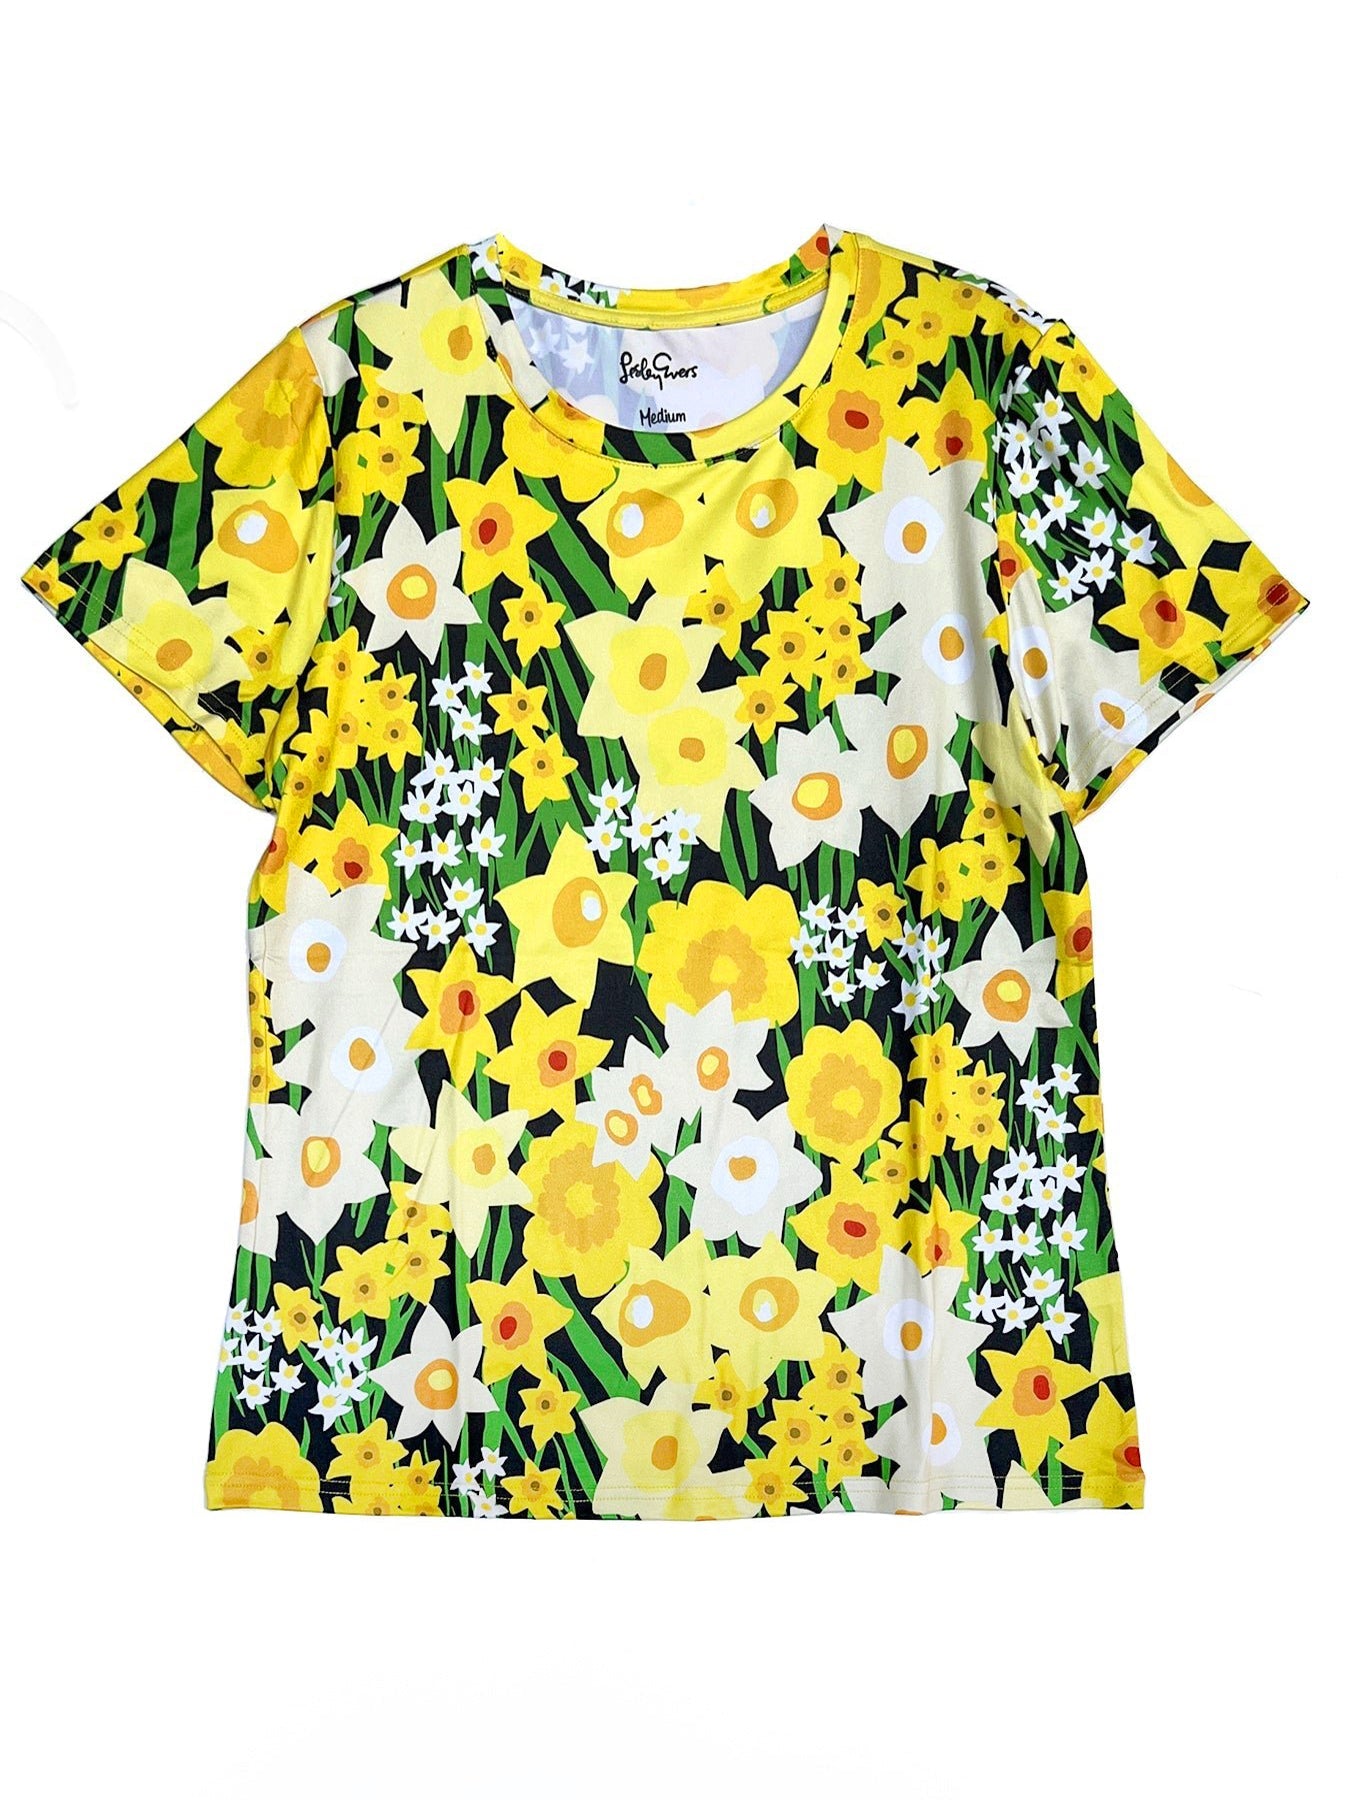 SUZI tee Daffodils - Lesley Evers-Best Seller-Shop-Shop/All Products